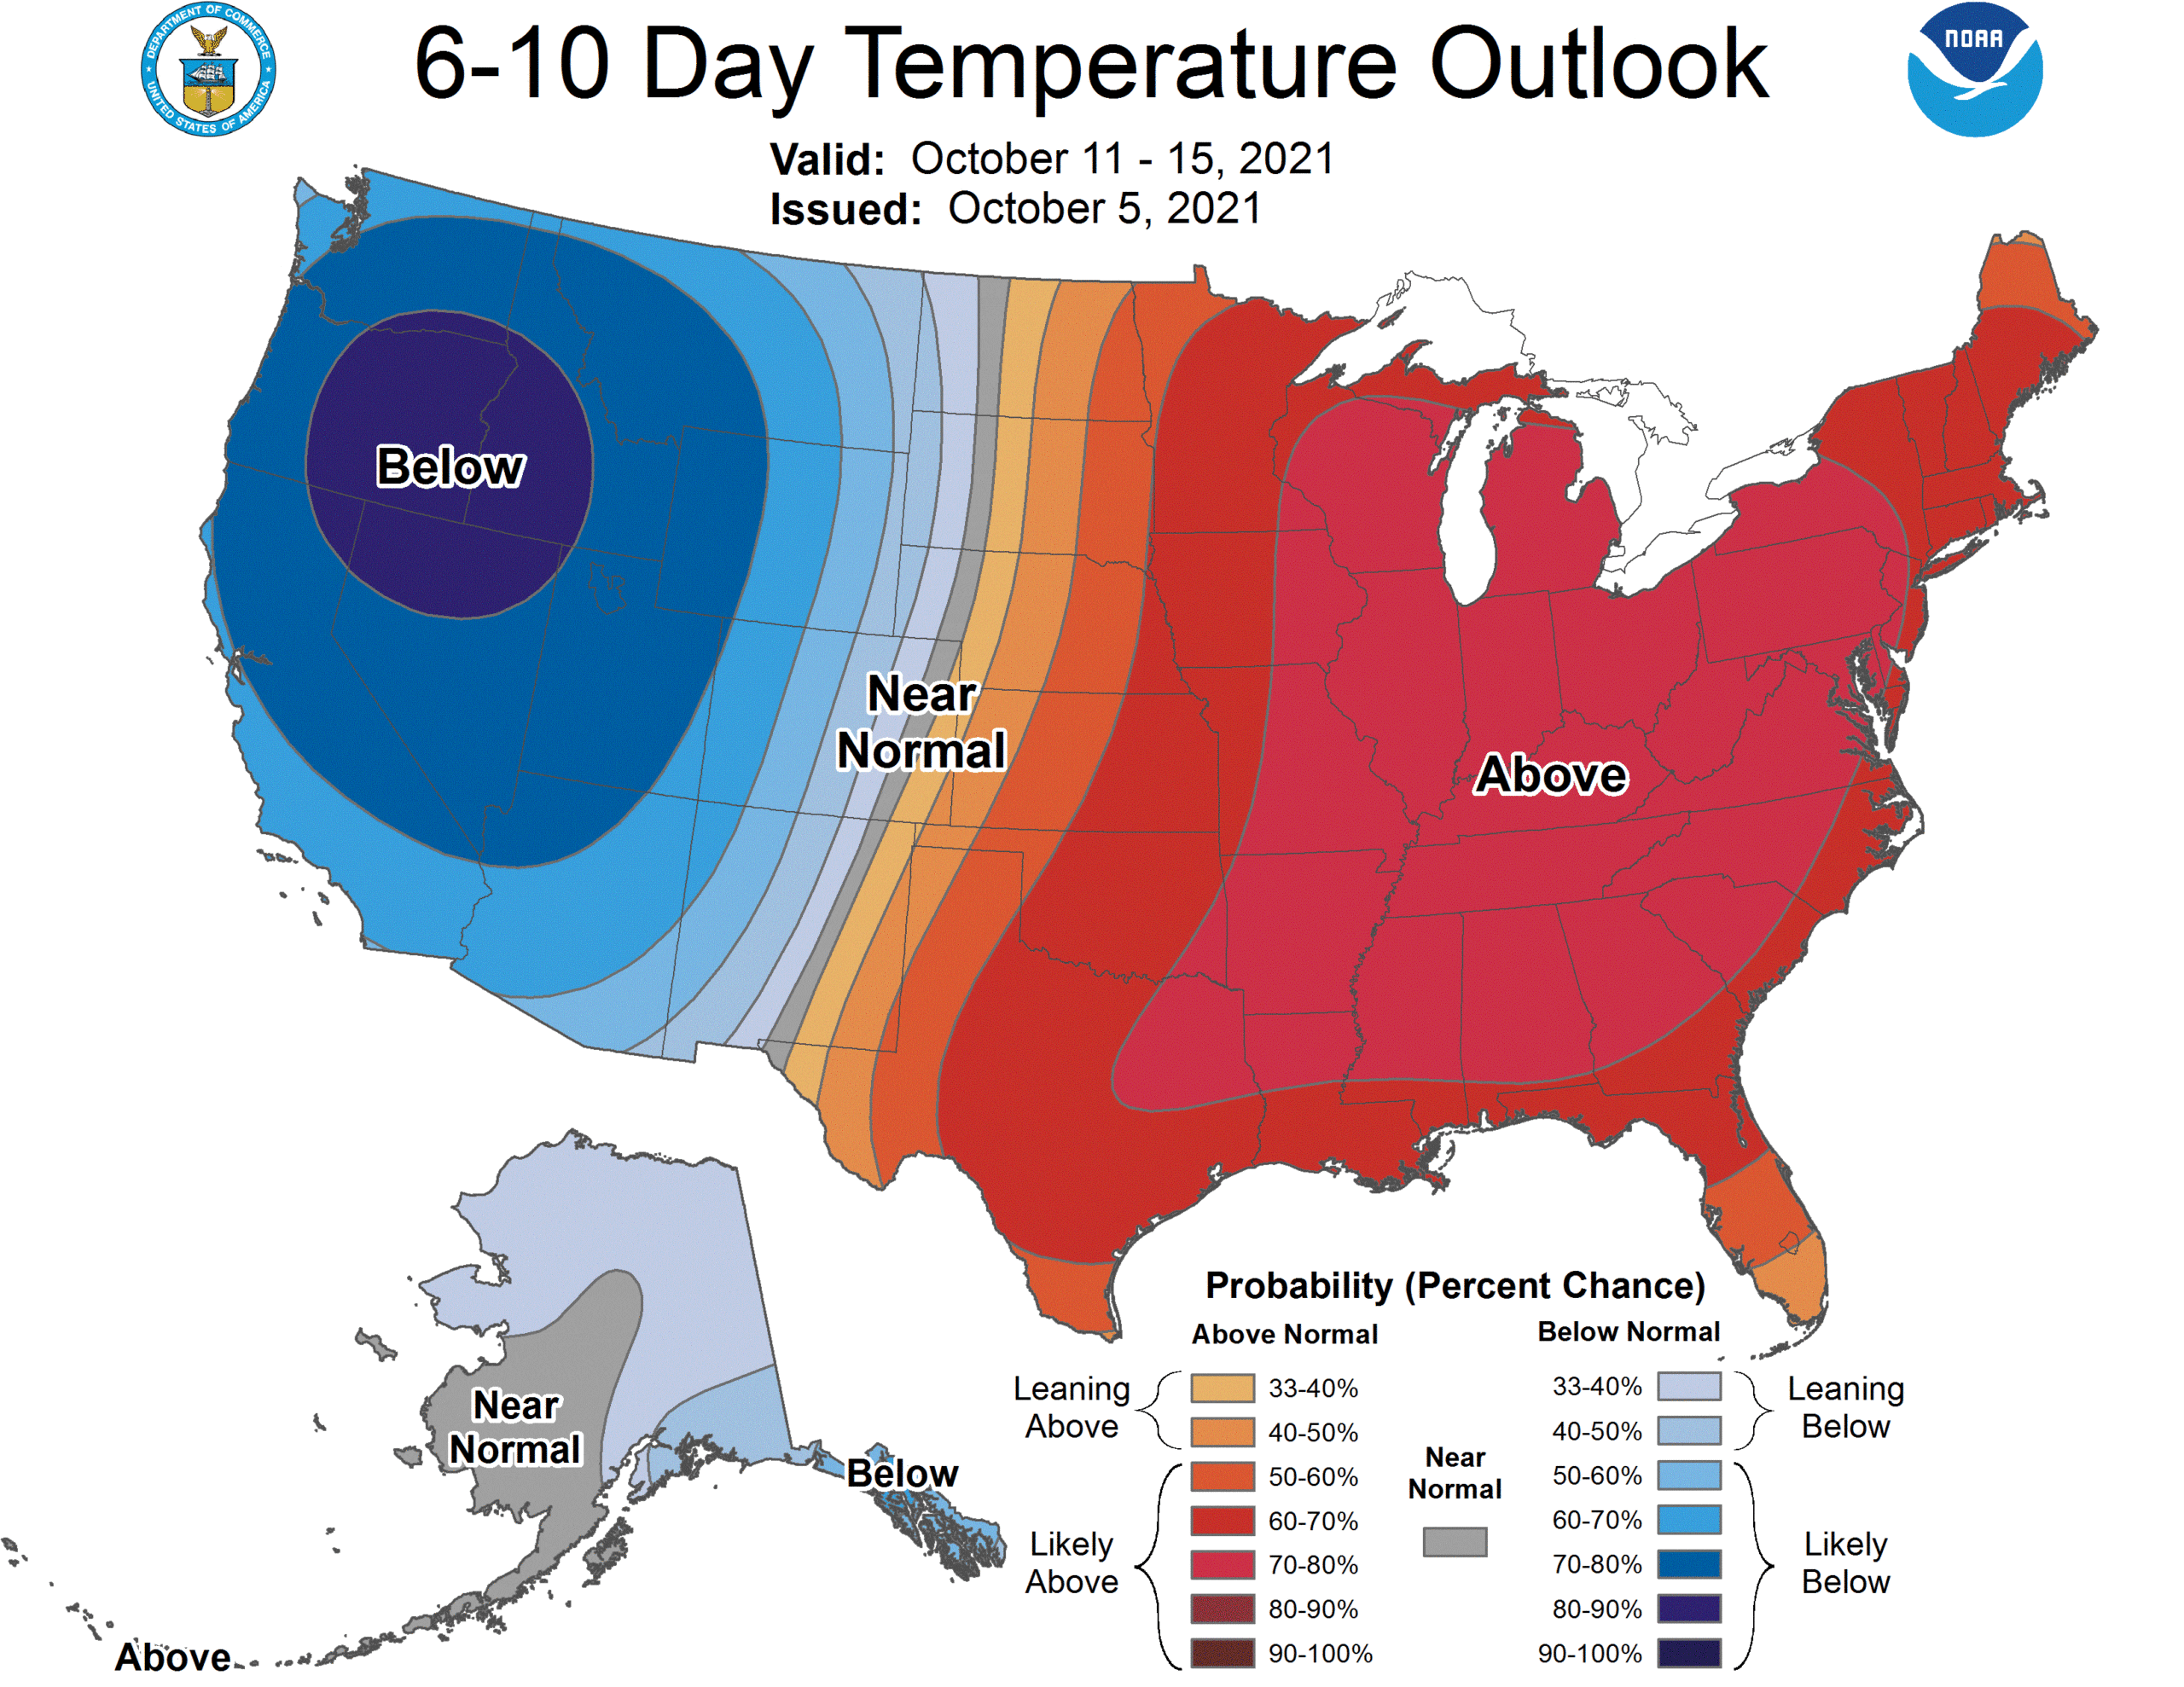 Temperature outlook february 14-18, 2021